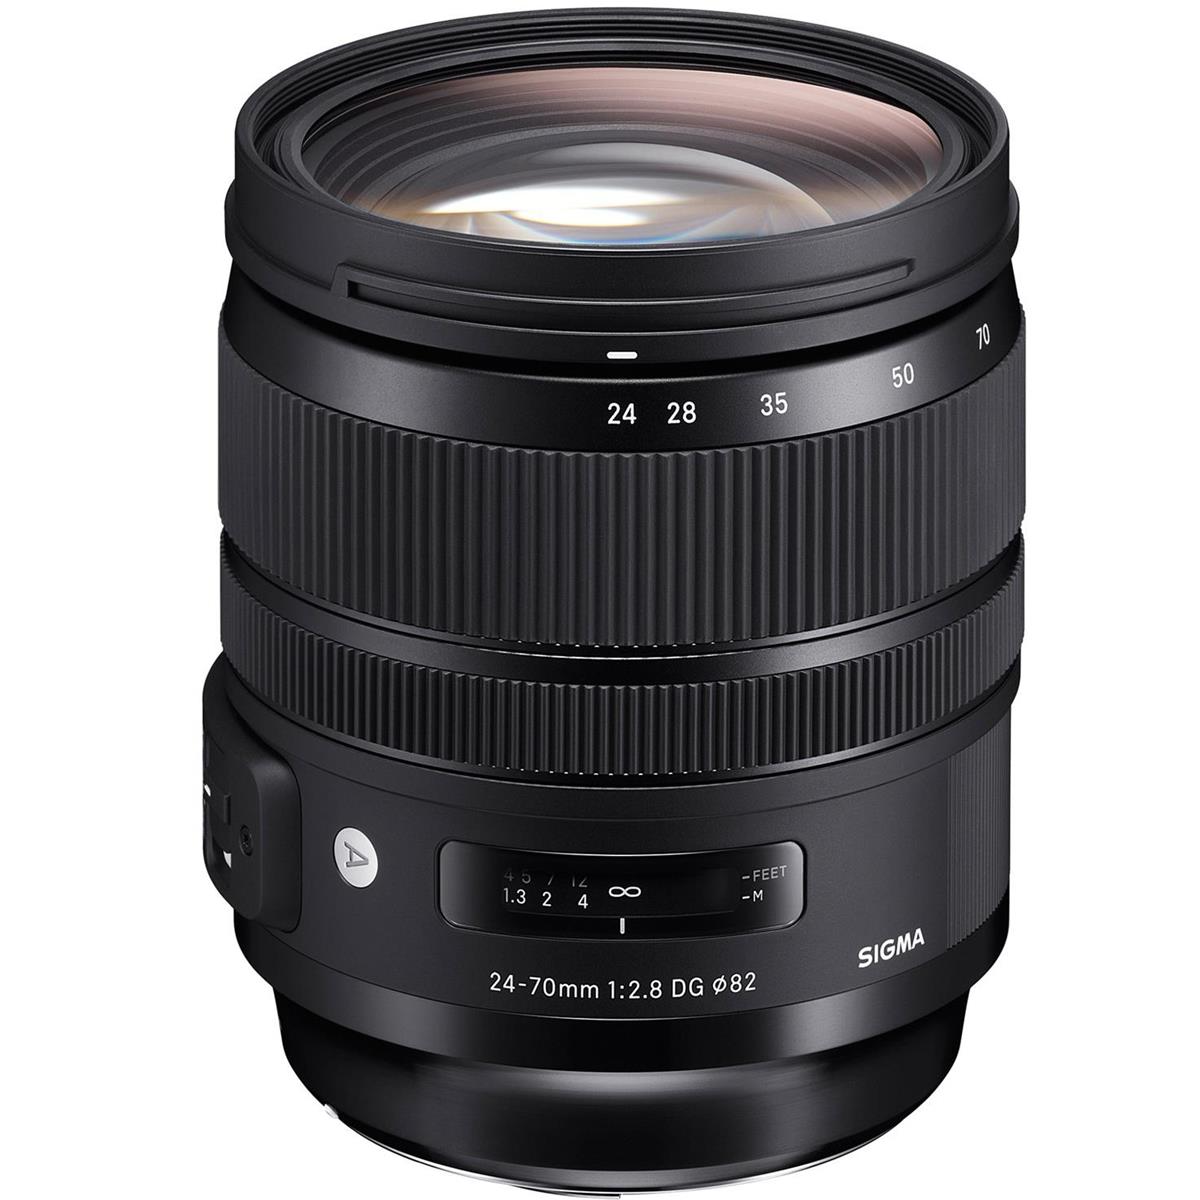 

Sigma 24-70mm f/2.8 DG OS HSM IF ART Lens for Canon EF